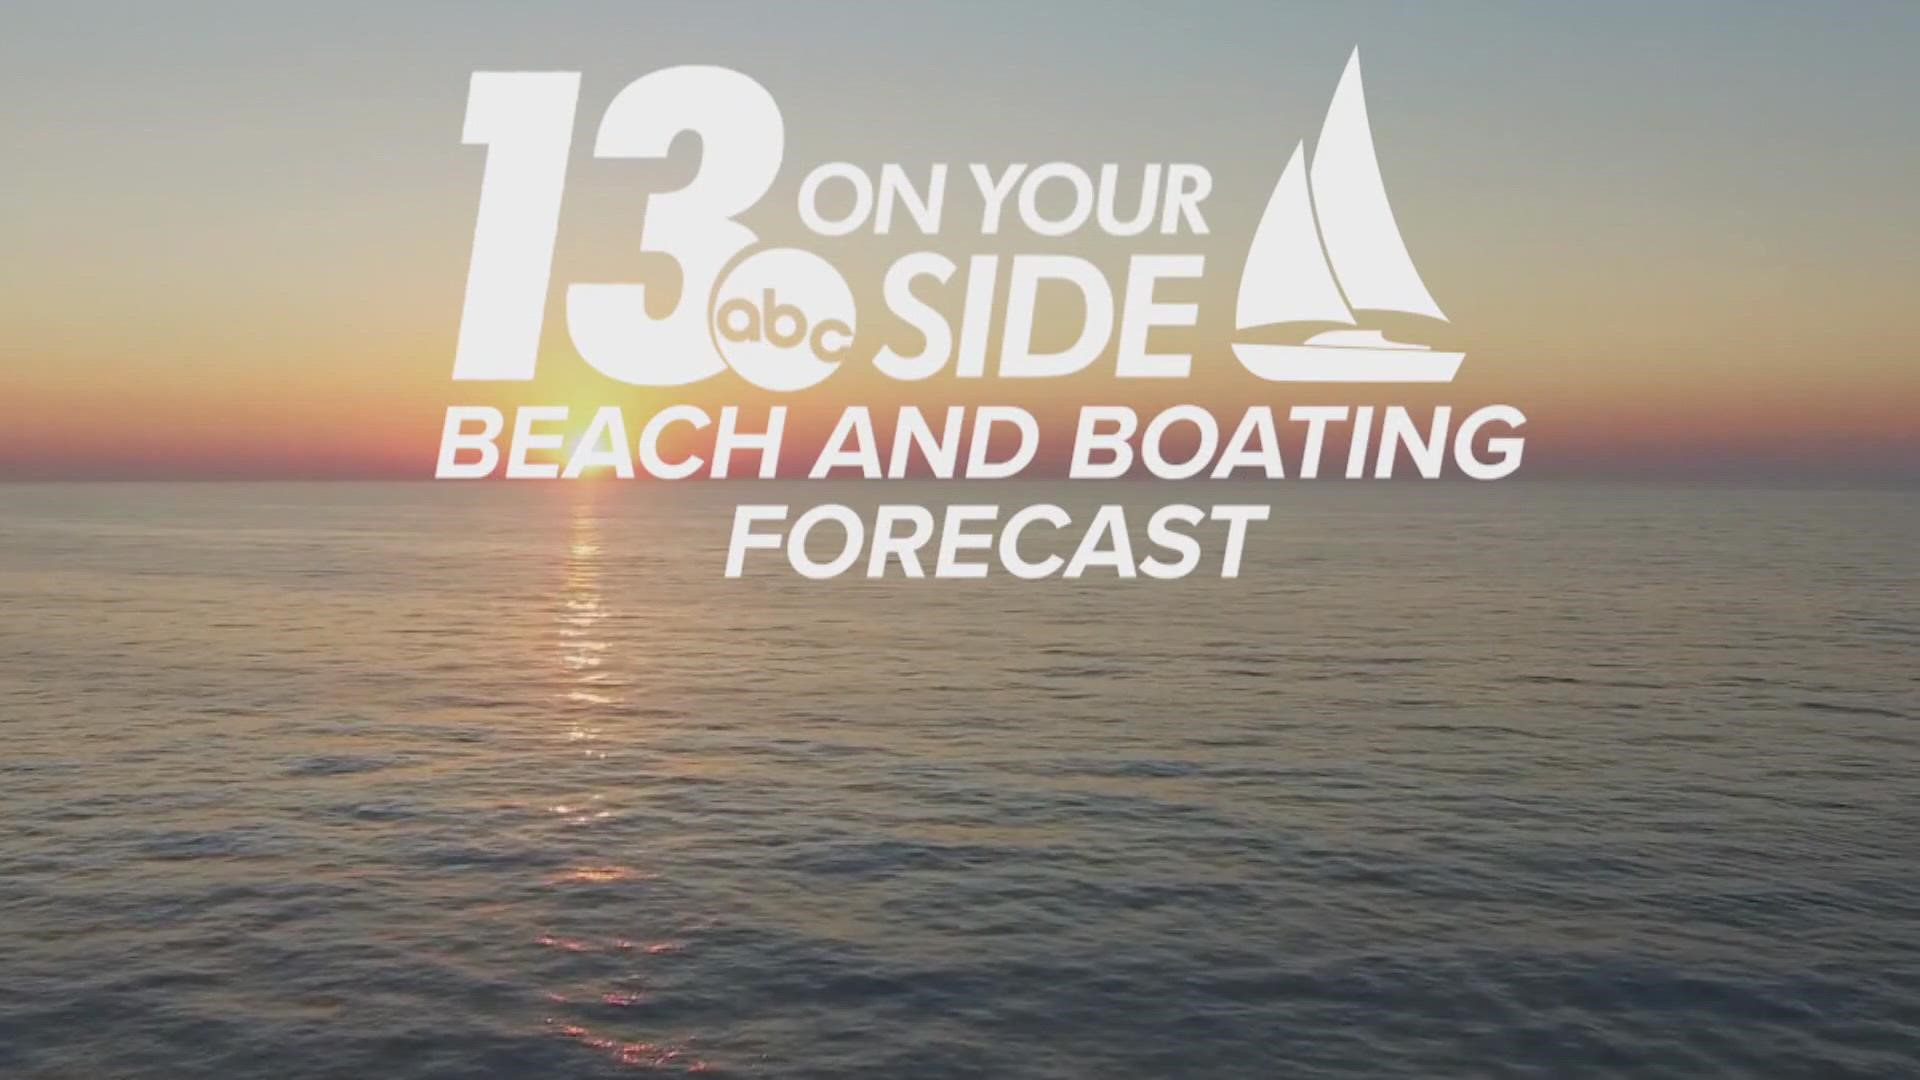 Meteorologist Michael Behrens has your West Michigan Beach & Boating forecast for Monday 6/20/2022.